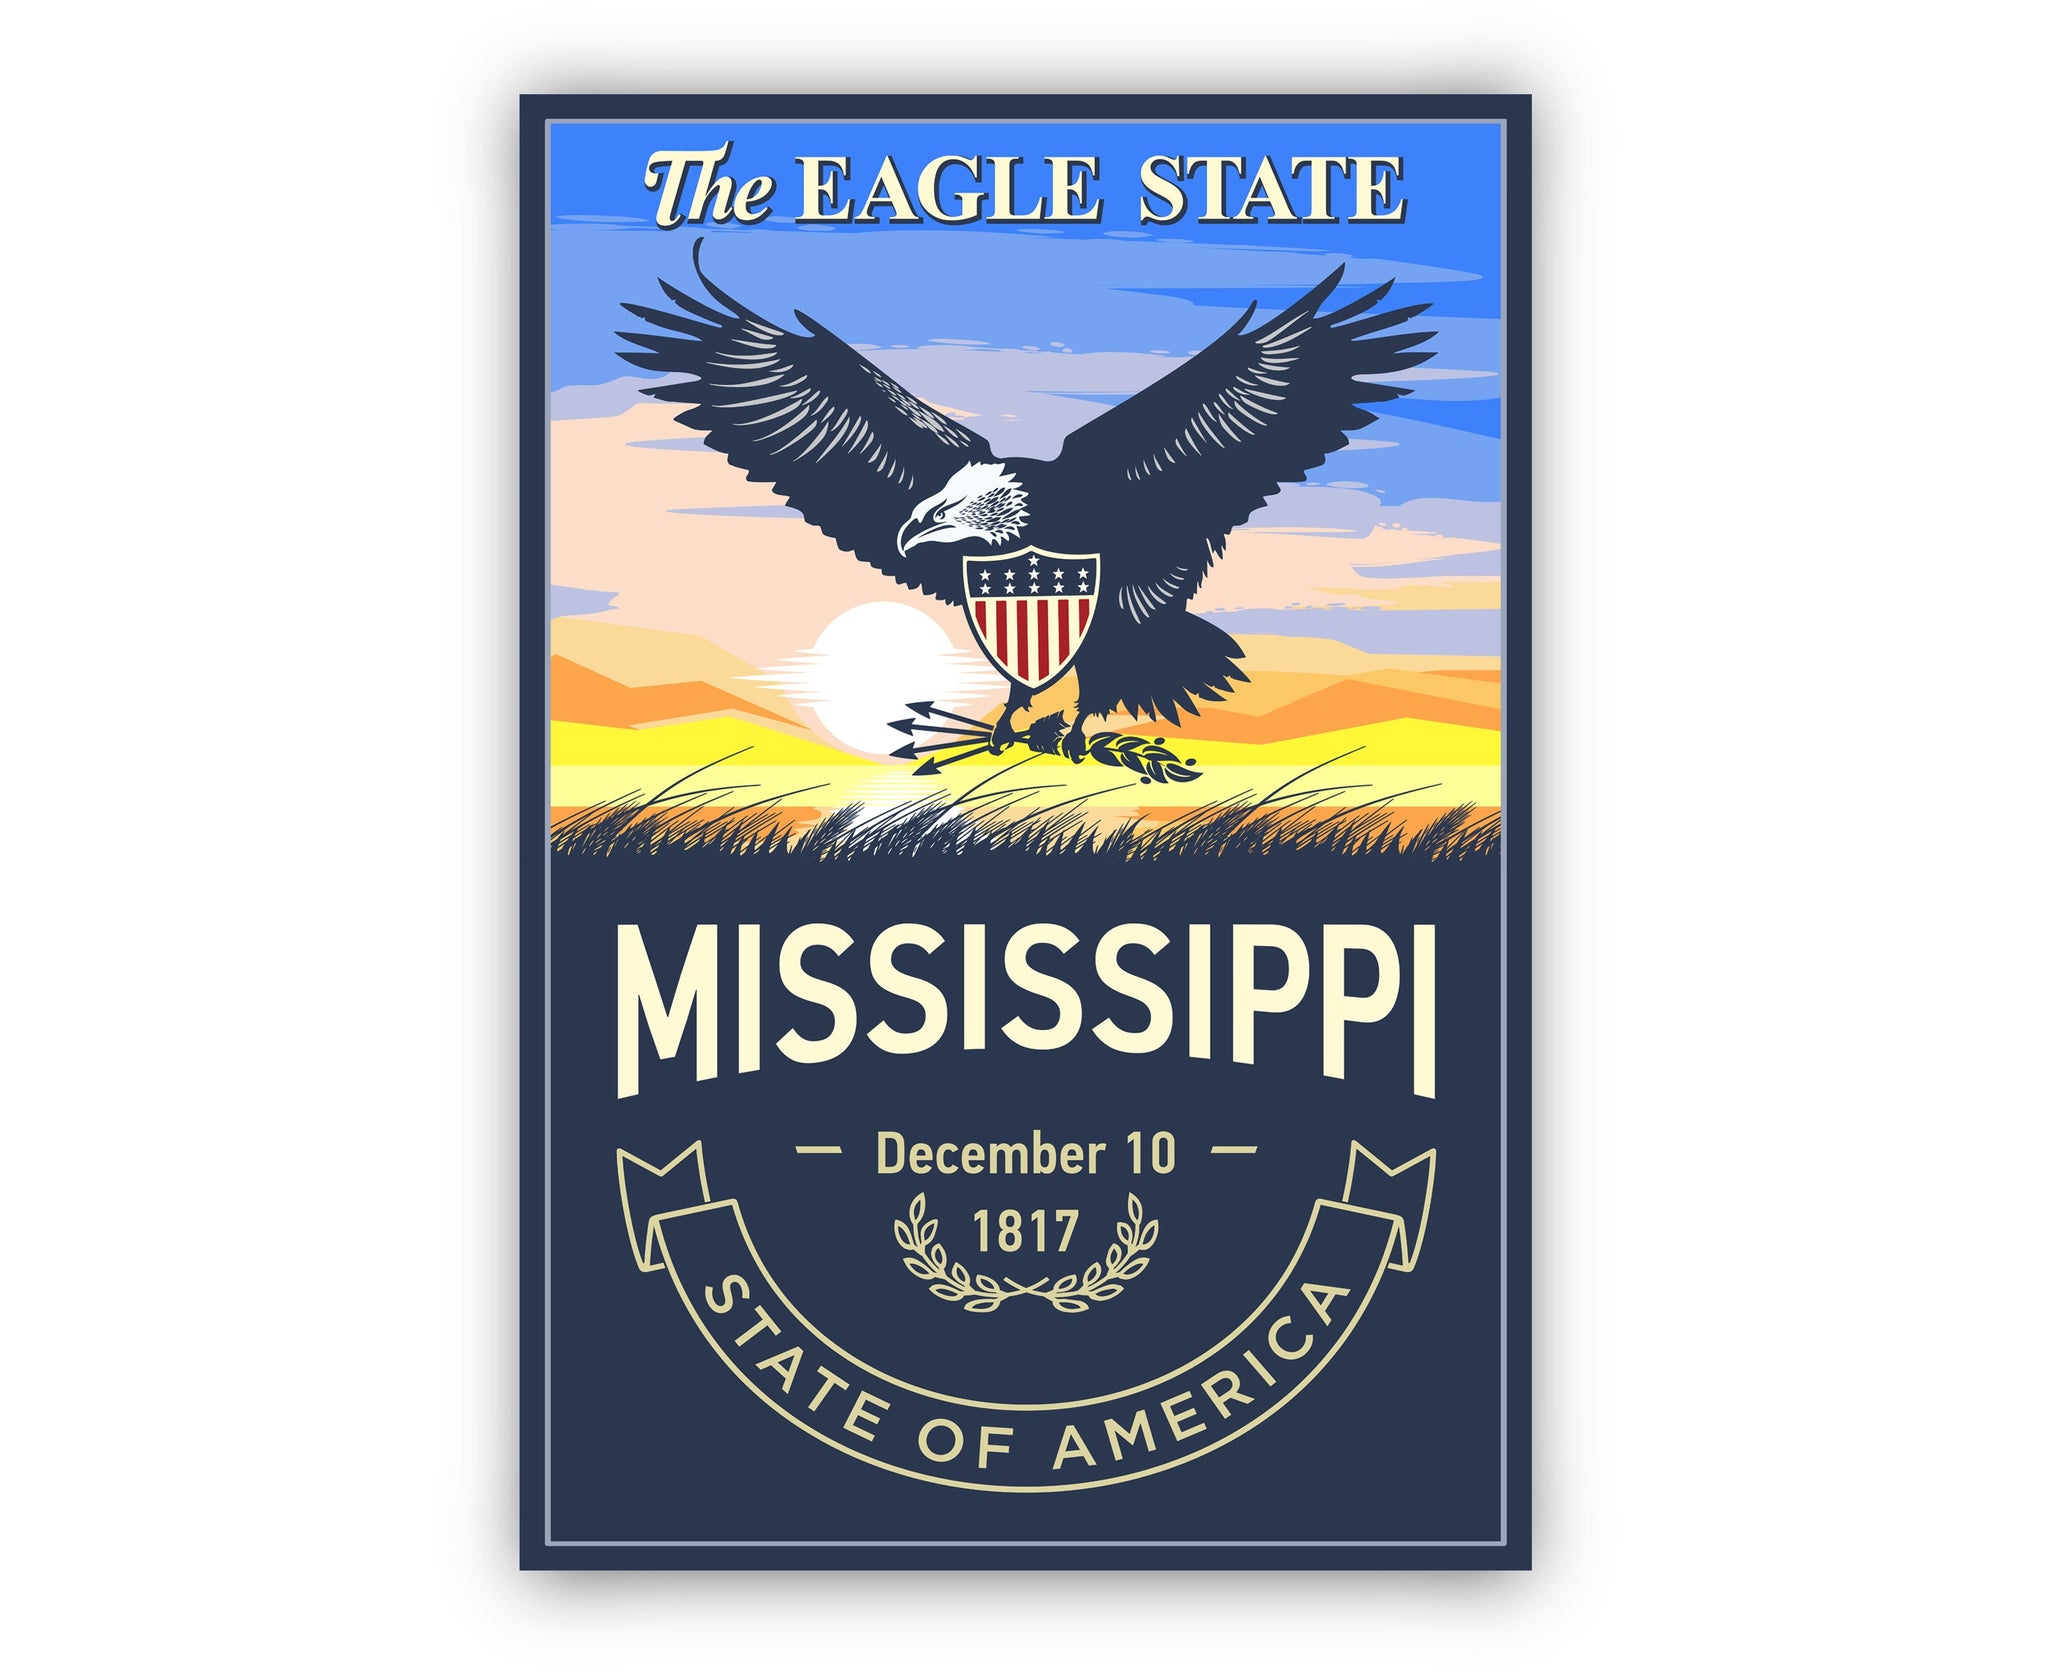 United States Poster, Mississippi State Poster Print, Mississippi State Emblem Poster, Retro Travel State Poster, Home and Office Wall Art